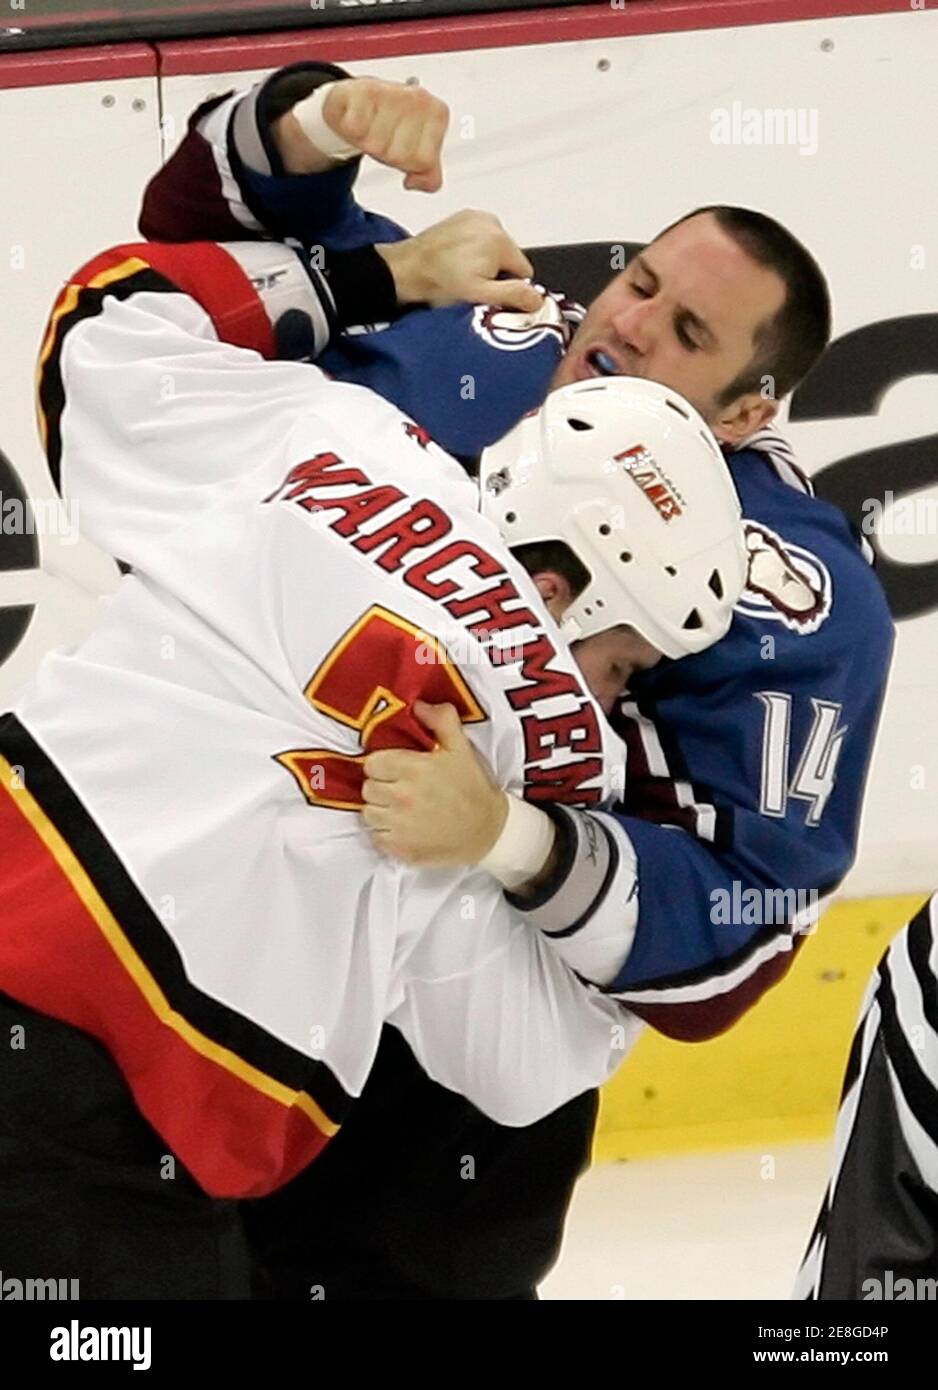 Calgary Flames defenseman Bryan Marchment (L) and Colorado Avalanche winger Ian Laperriere fight in the third period in Denver November 21, 2005. The Flames went on to win the game 3-2 scoring one goal in the shootout round. REUTERS/Rick Wilking Stock Photo